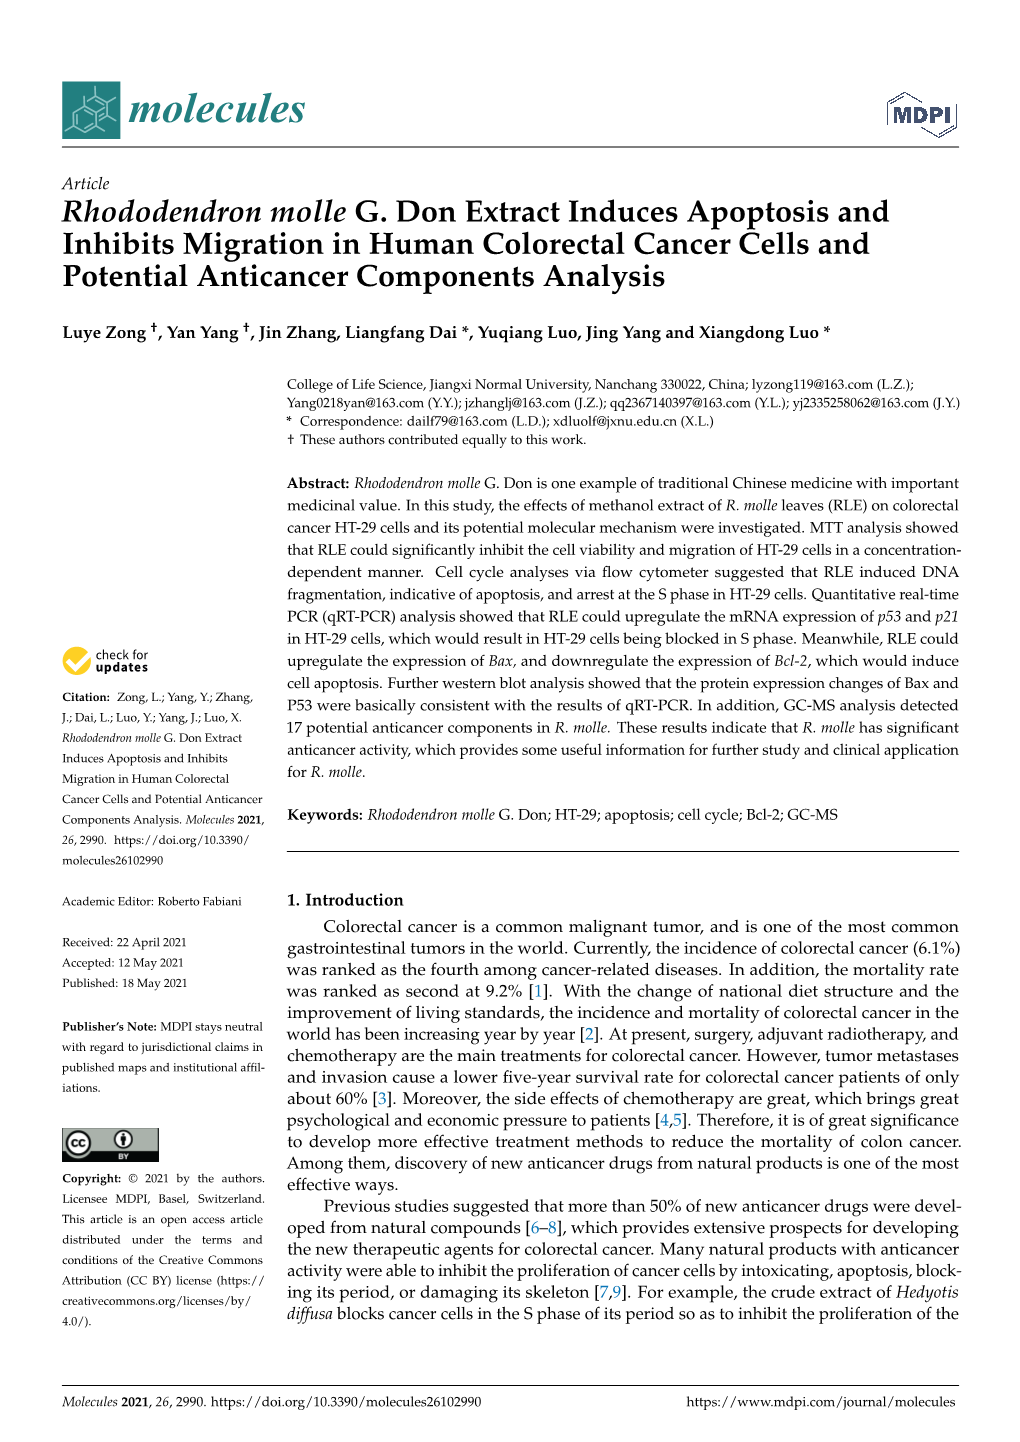 Rhododendron Molle G. Don Extract Induces Apoptosis and Inhibits Migration in Human Colorectal Cancer Cells and Potential Anticancer Components Analysis